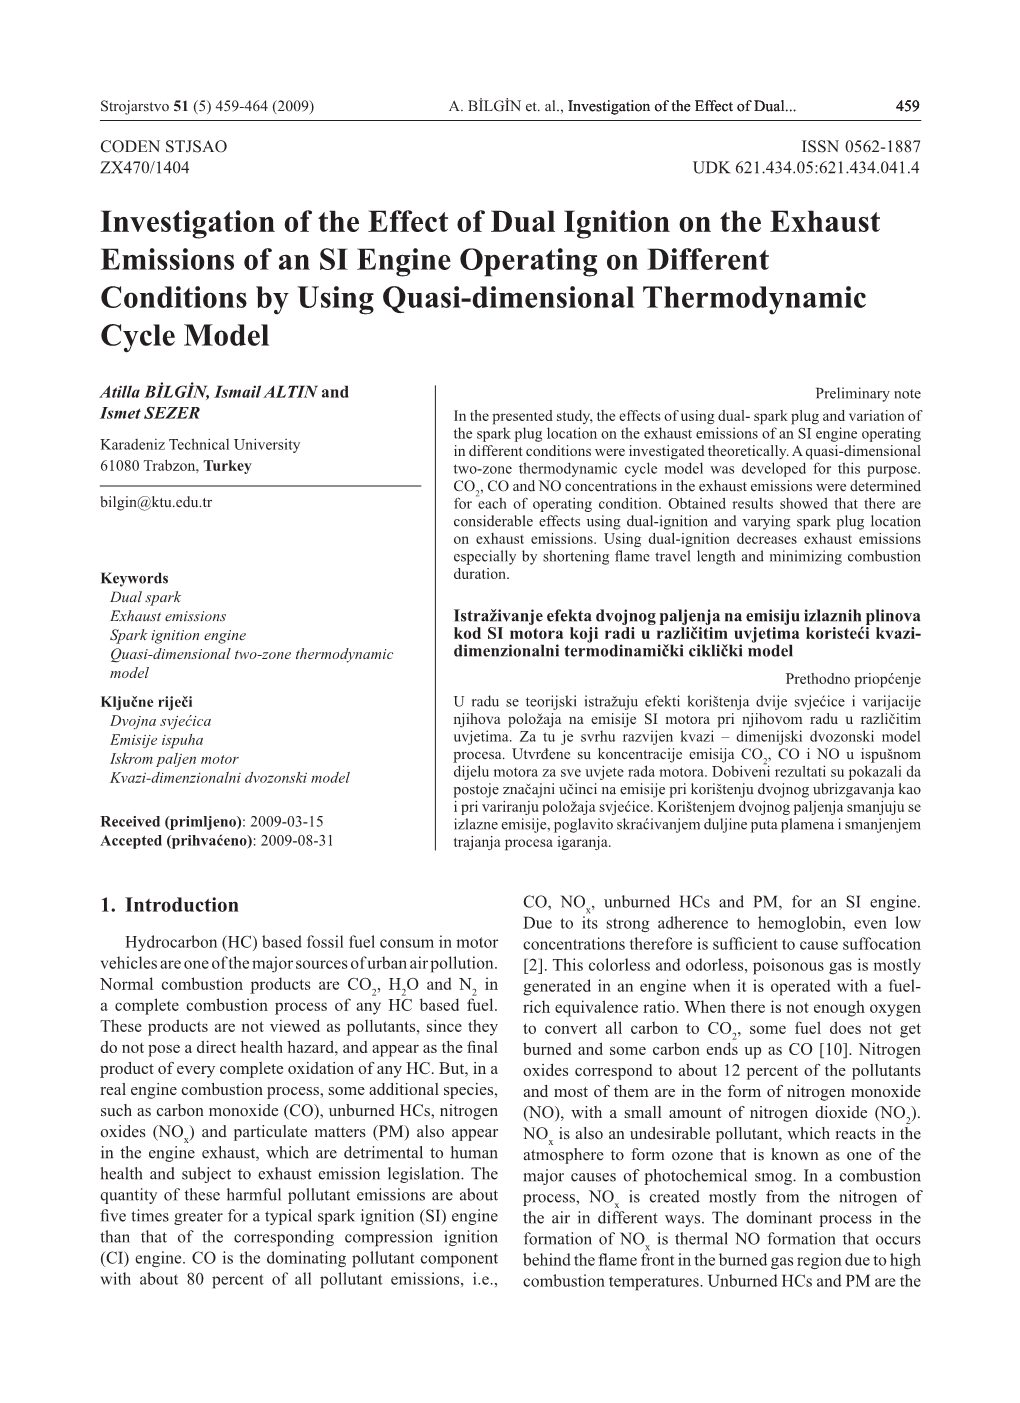 Investigation of the Effect of Dual Ignition on the Exhaust Emissions